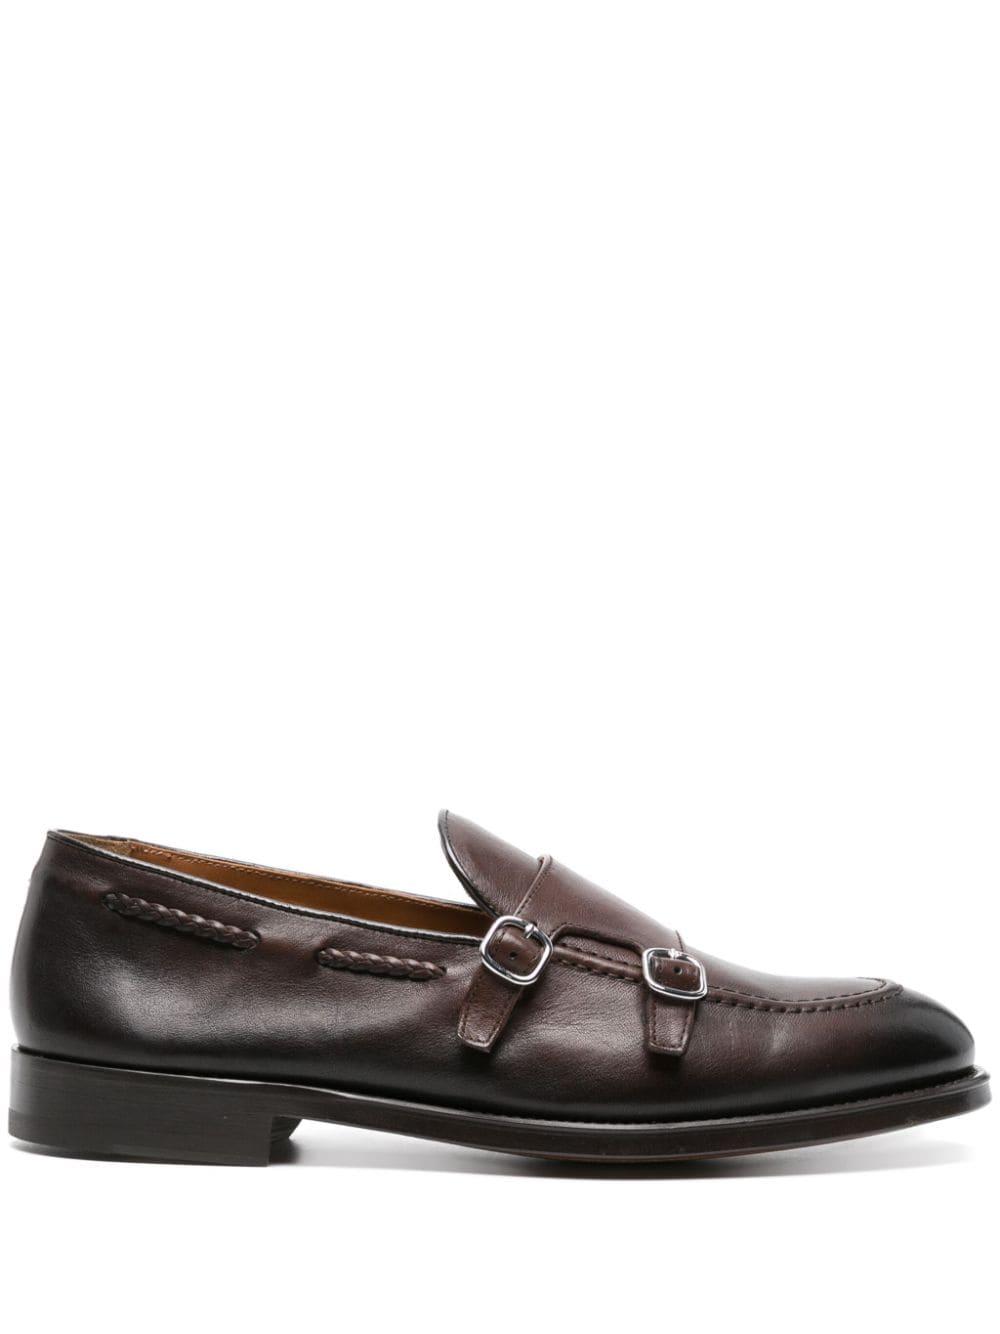 Image 1 of Doucal's double-buckle leather Monk shoes